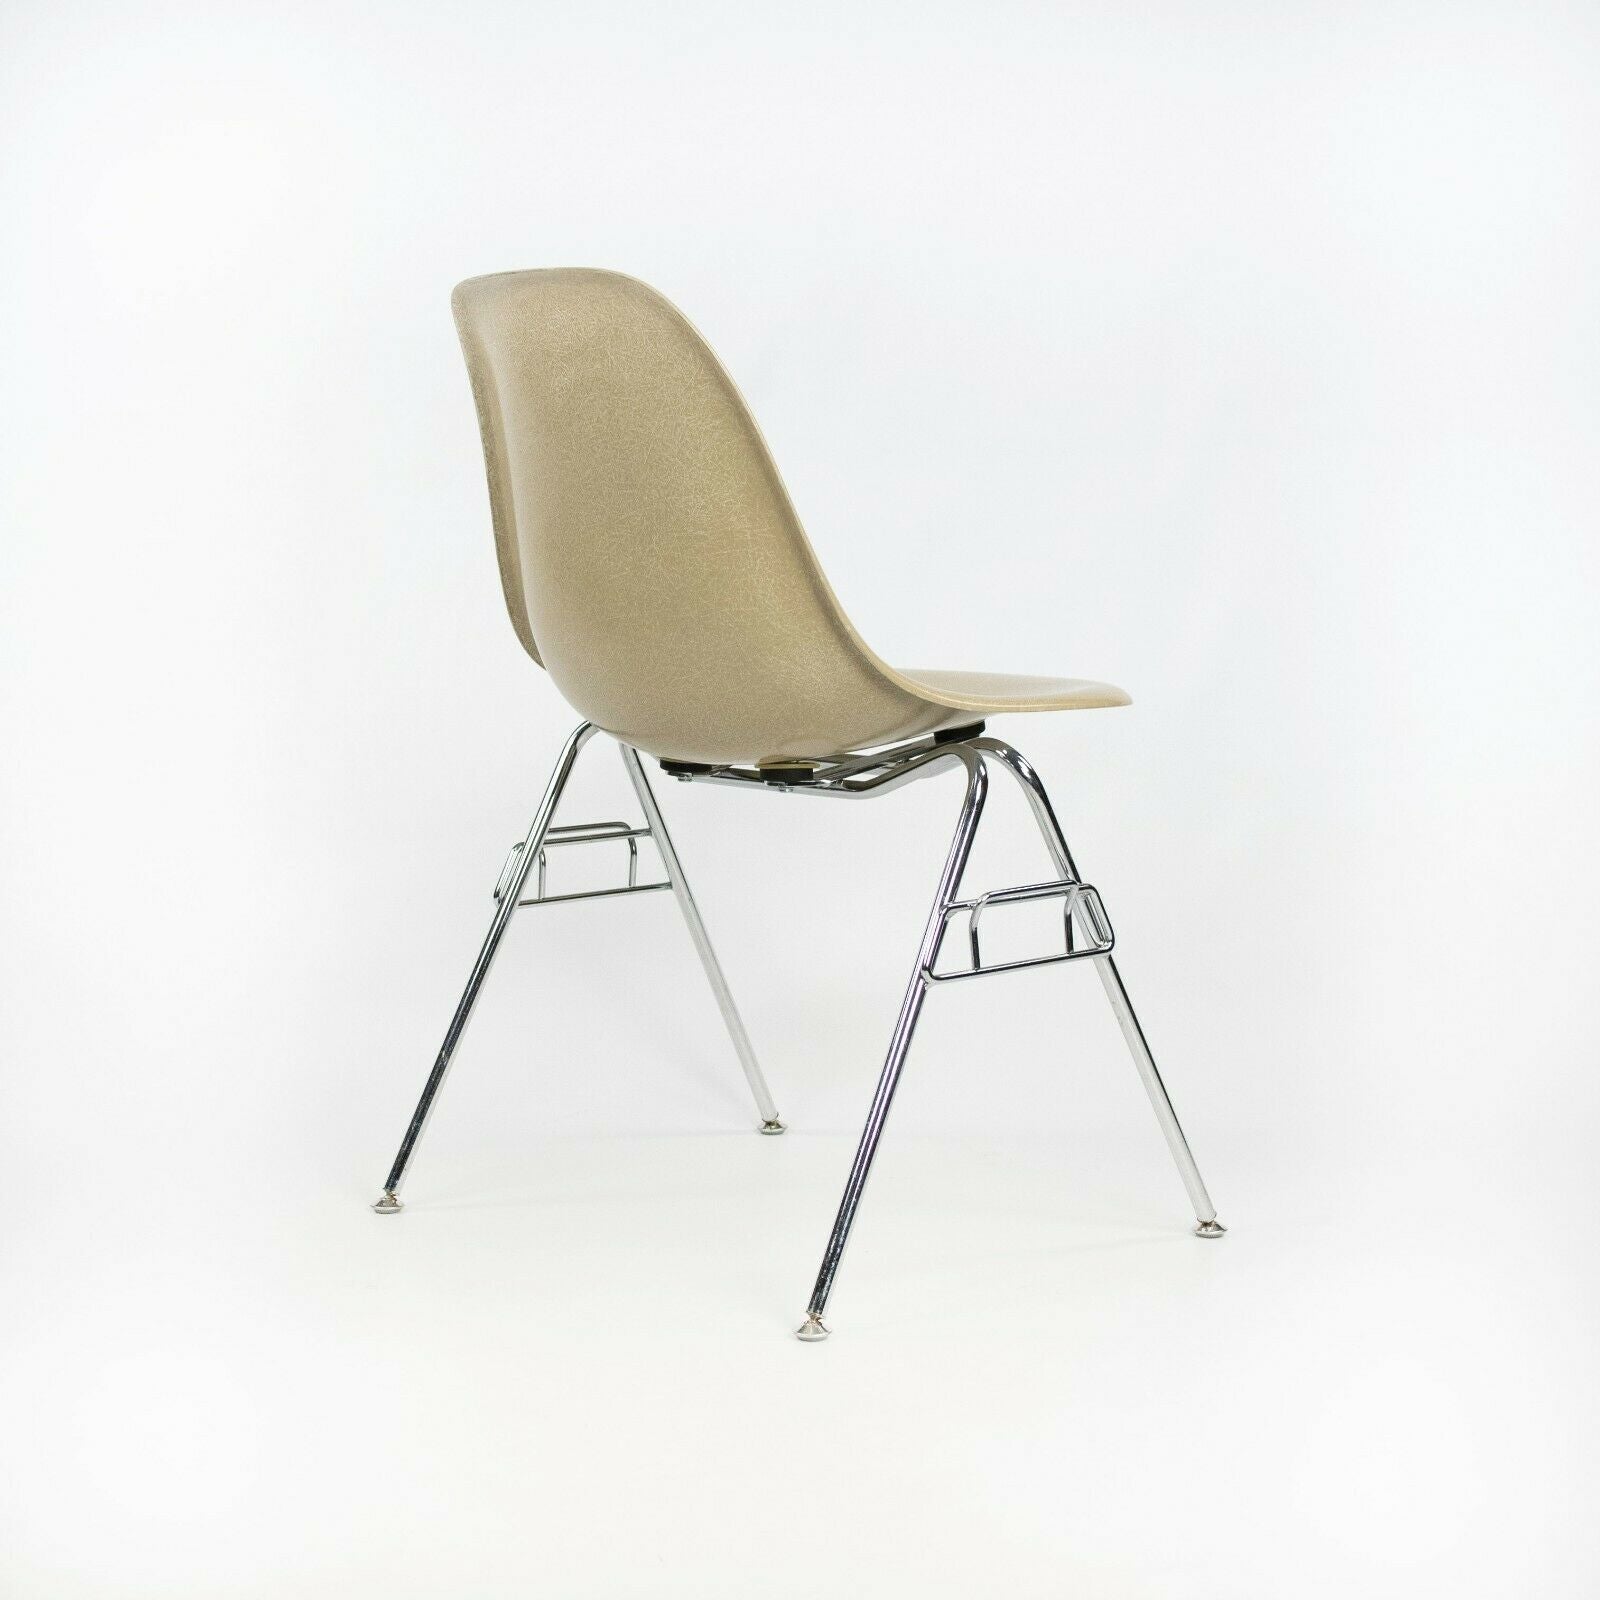 SOLD 2010s Eames Modernica Case Study Oatmeal Fiberglass Chairs with Stacking Bases